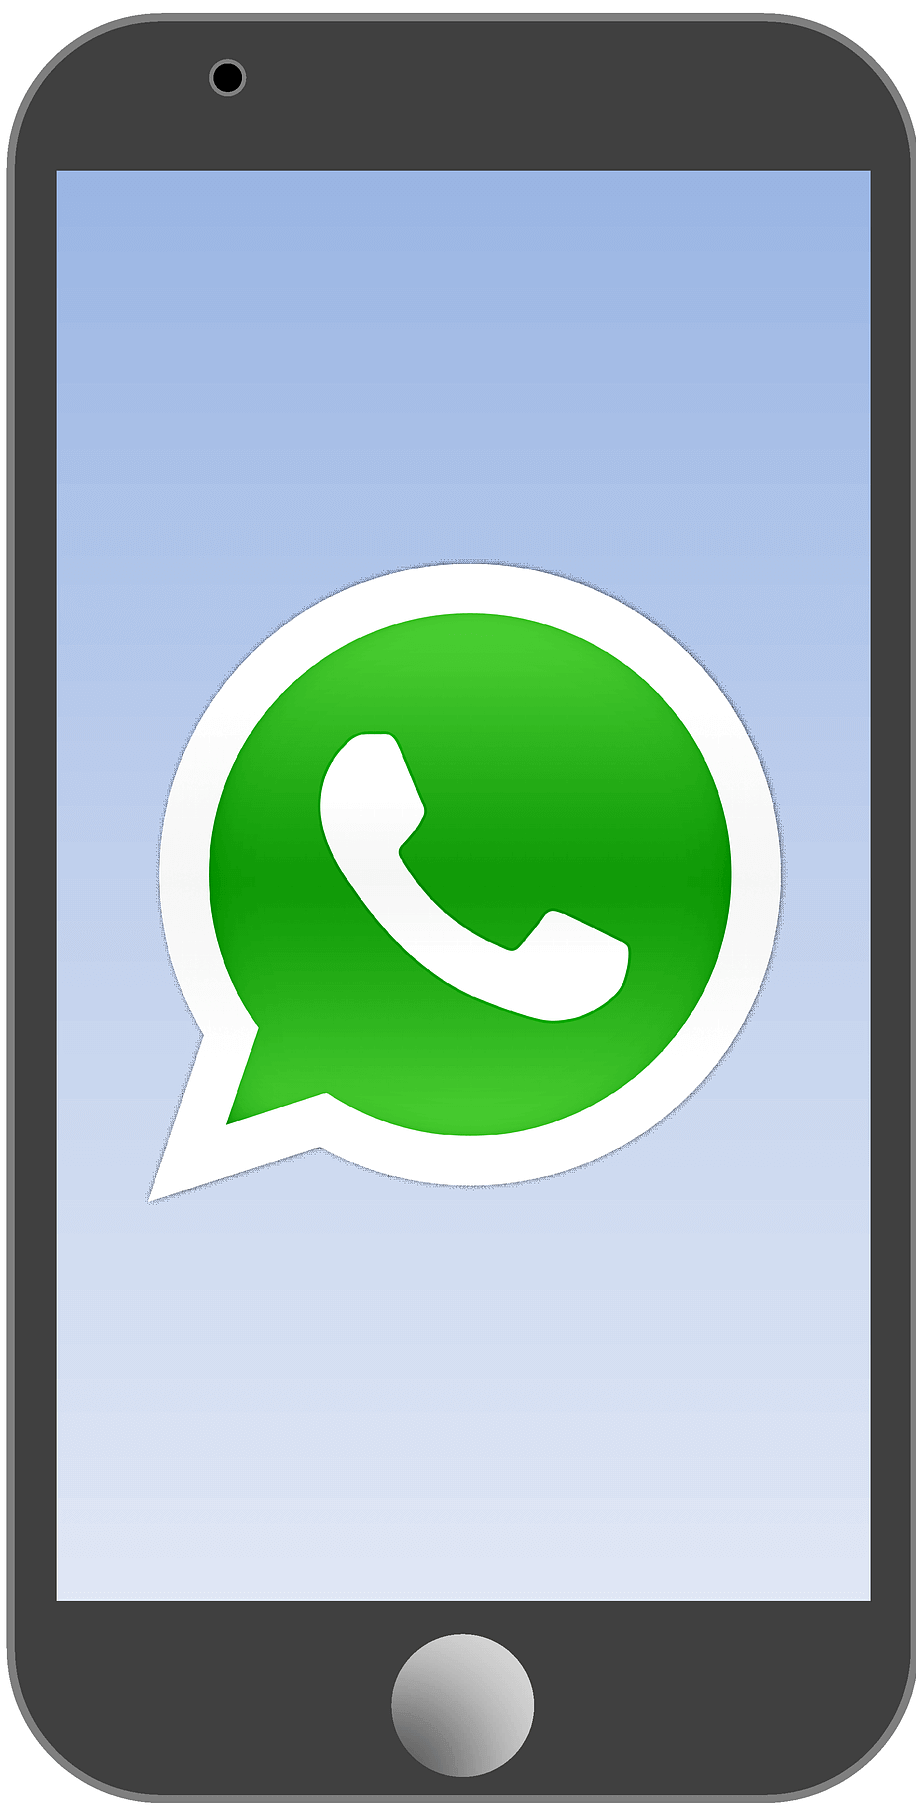 gb whatsapp download apk for pc